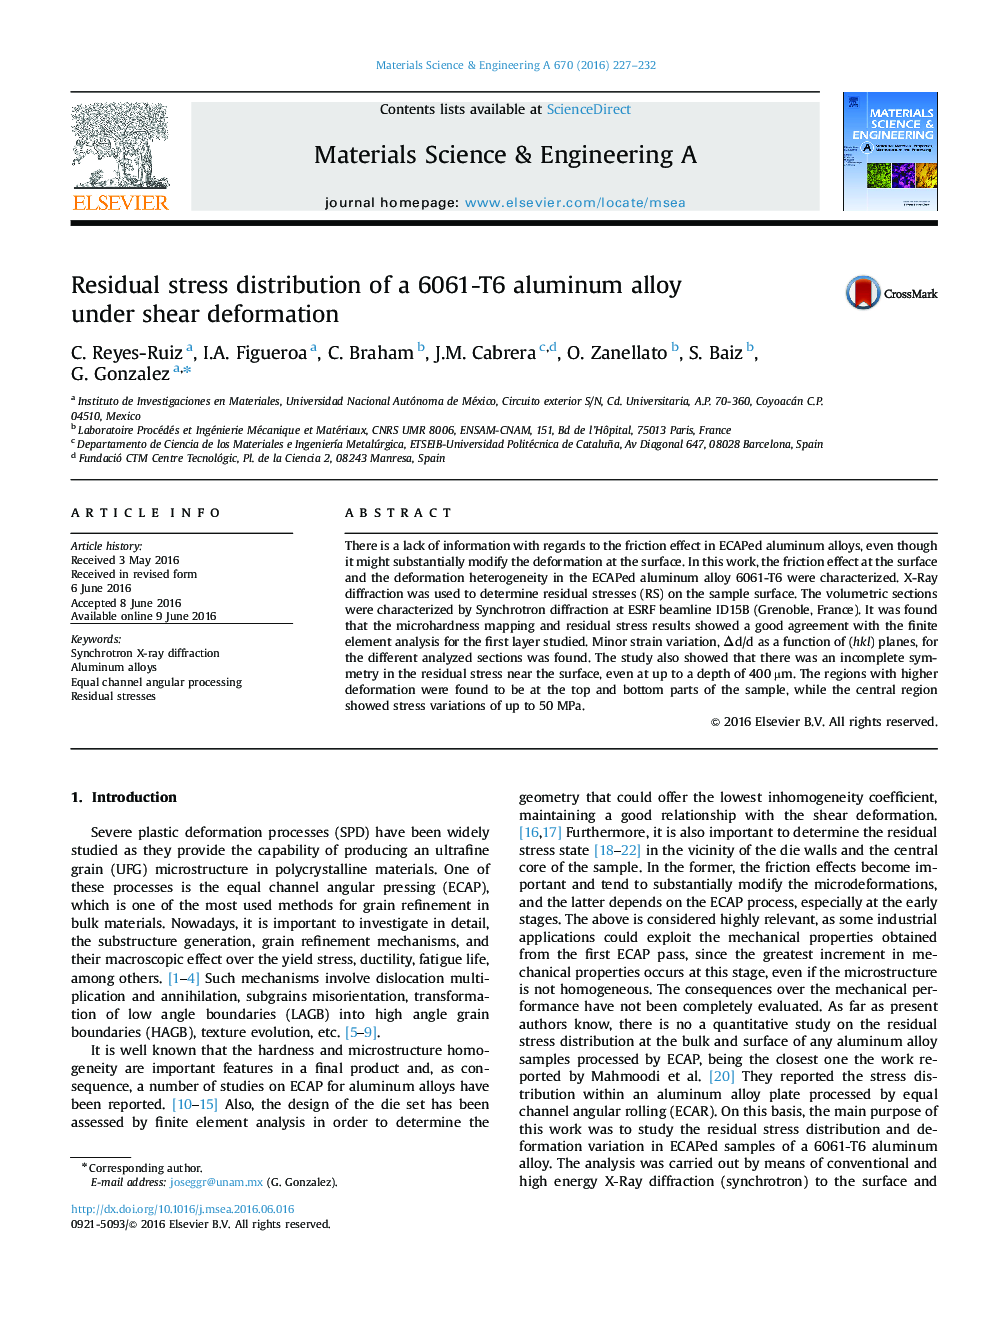 Residual stress distribution of a 6061-T6 aluminum alloy under shear deformation